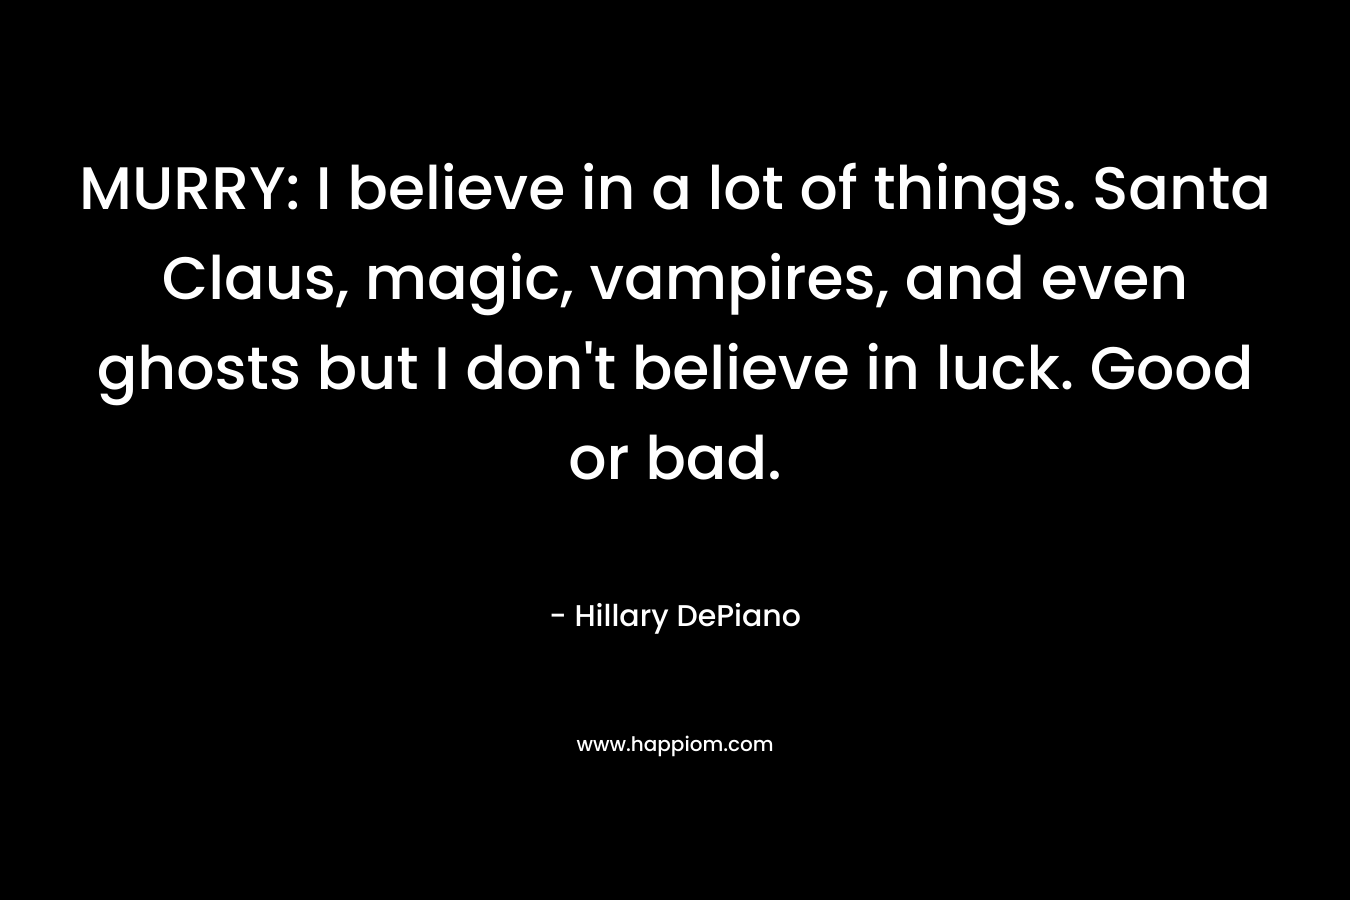 MURRY: I believe in a lot of things. Santa Claus, magic, vampires, and even ghosts but I don’t believe in luck. Good or bad. – Hillary DePiano